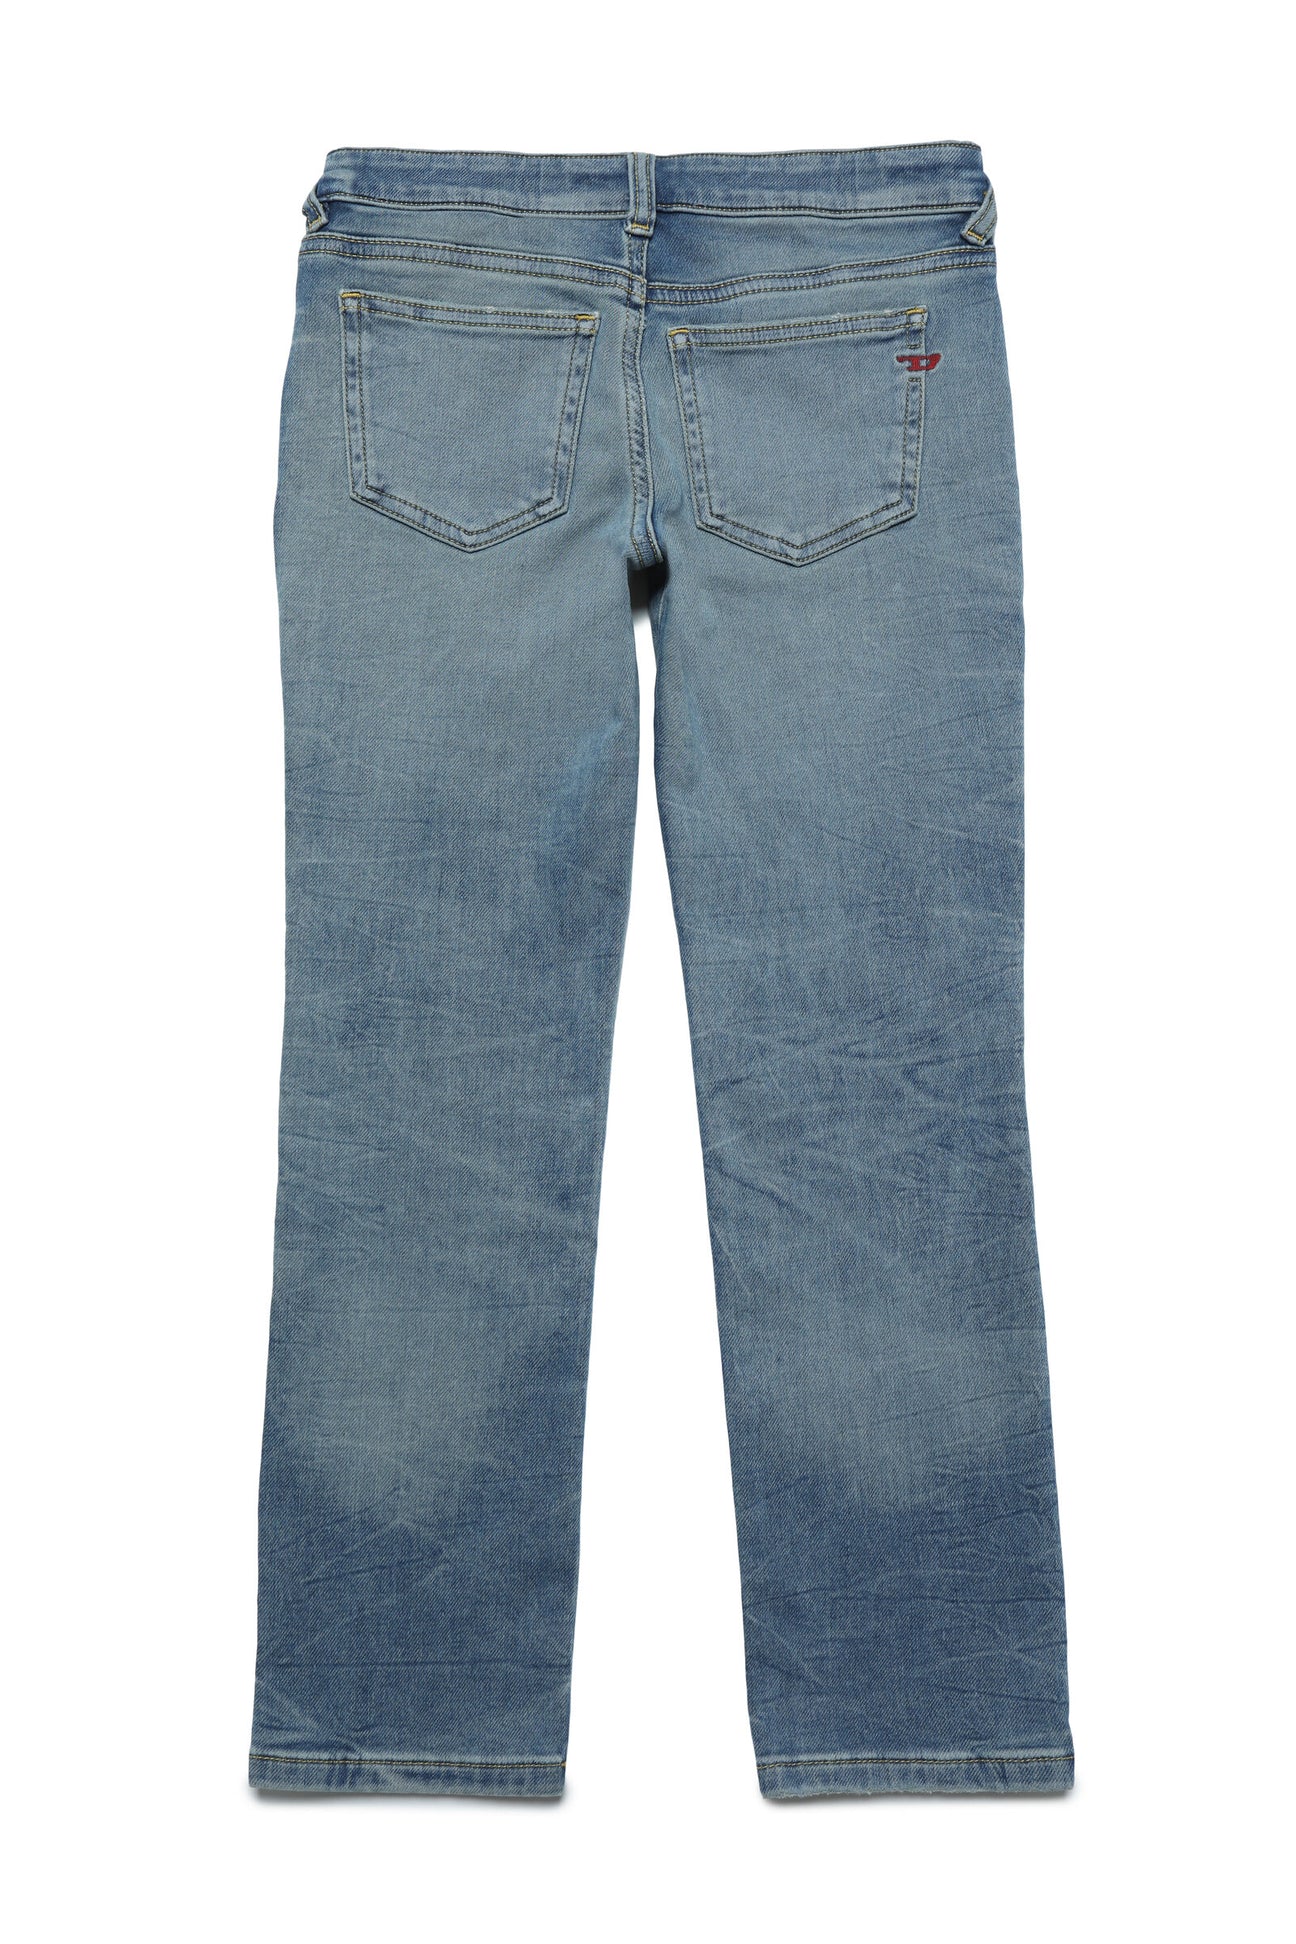 JoggJeans® 2002 straight light blue with abrasions JoggJeans® 2002 straight light blue with abrasions